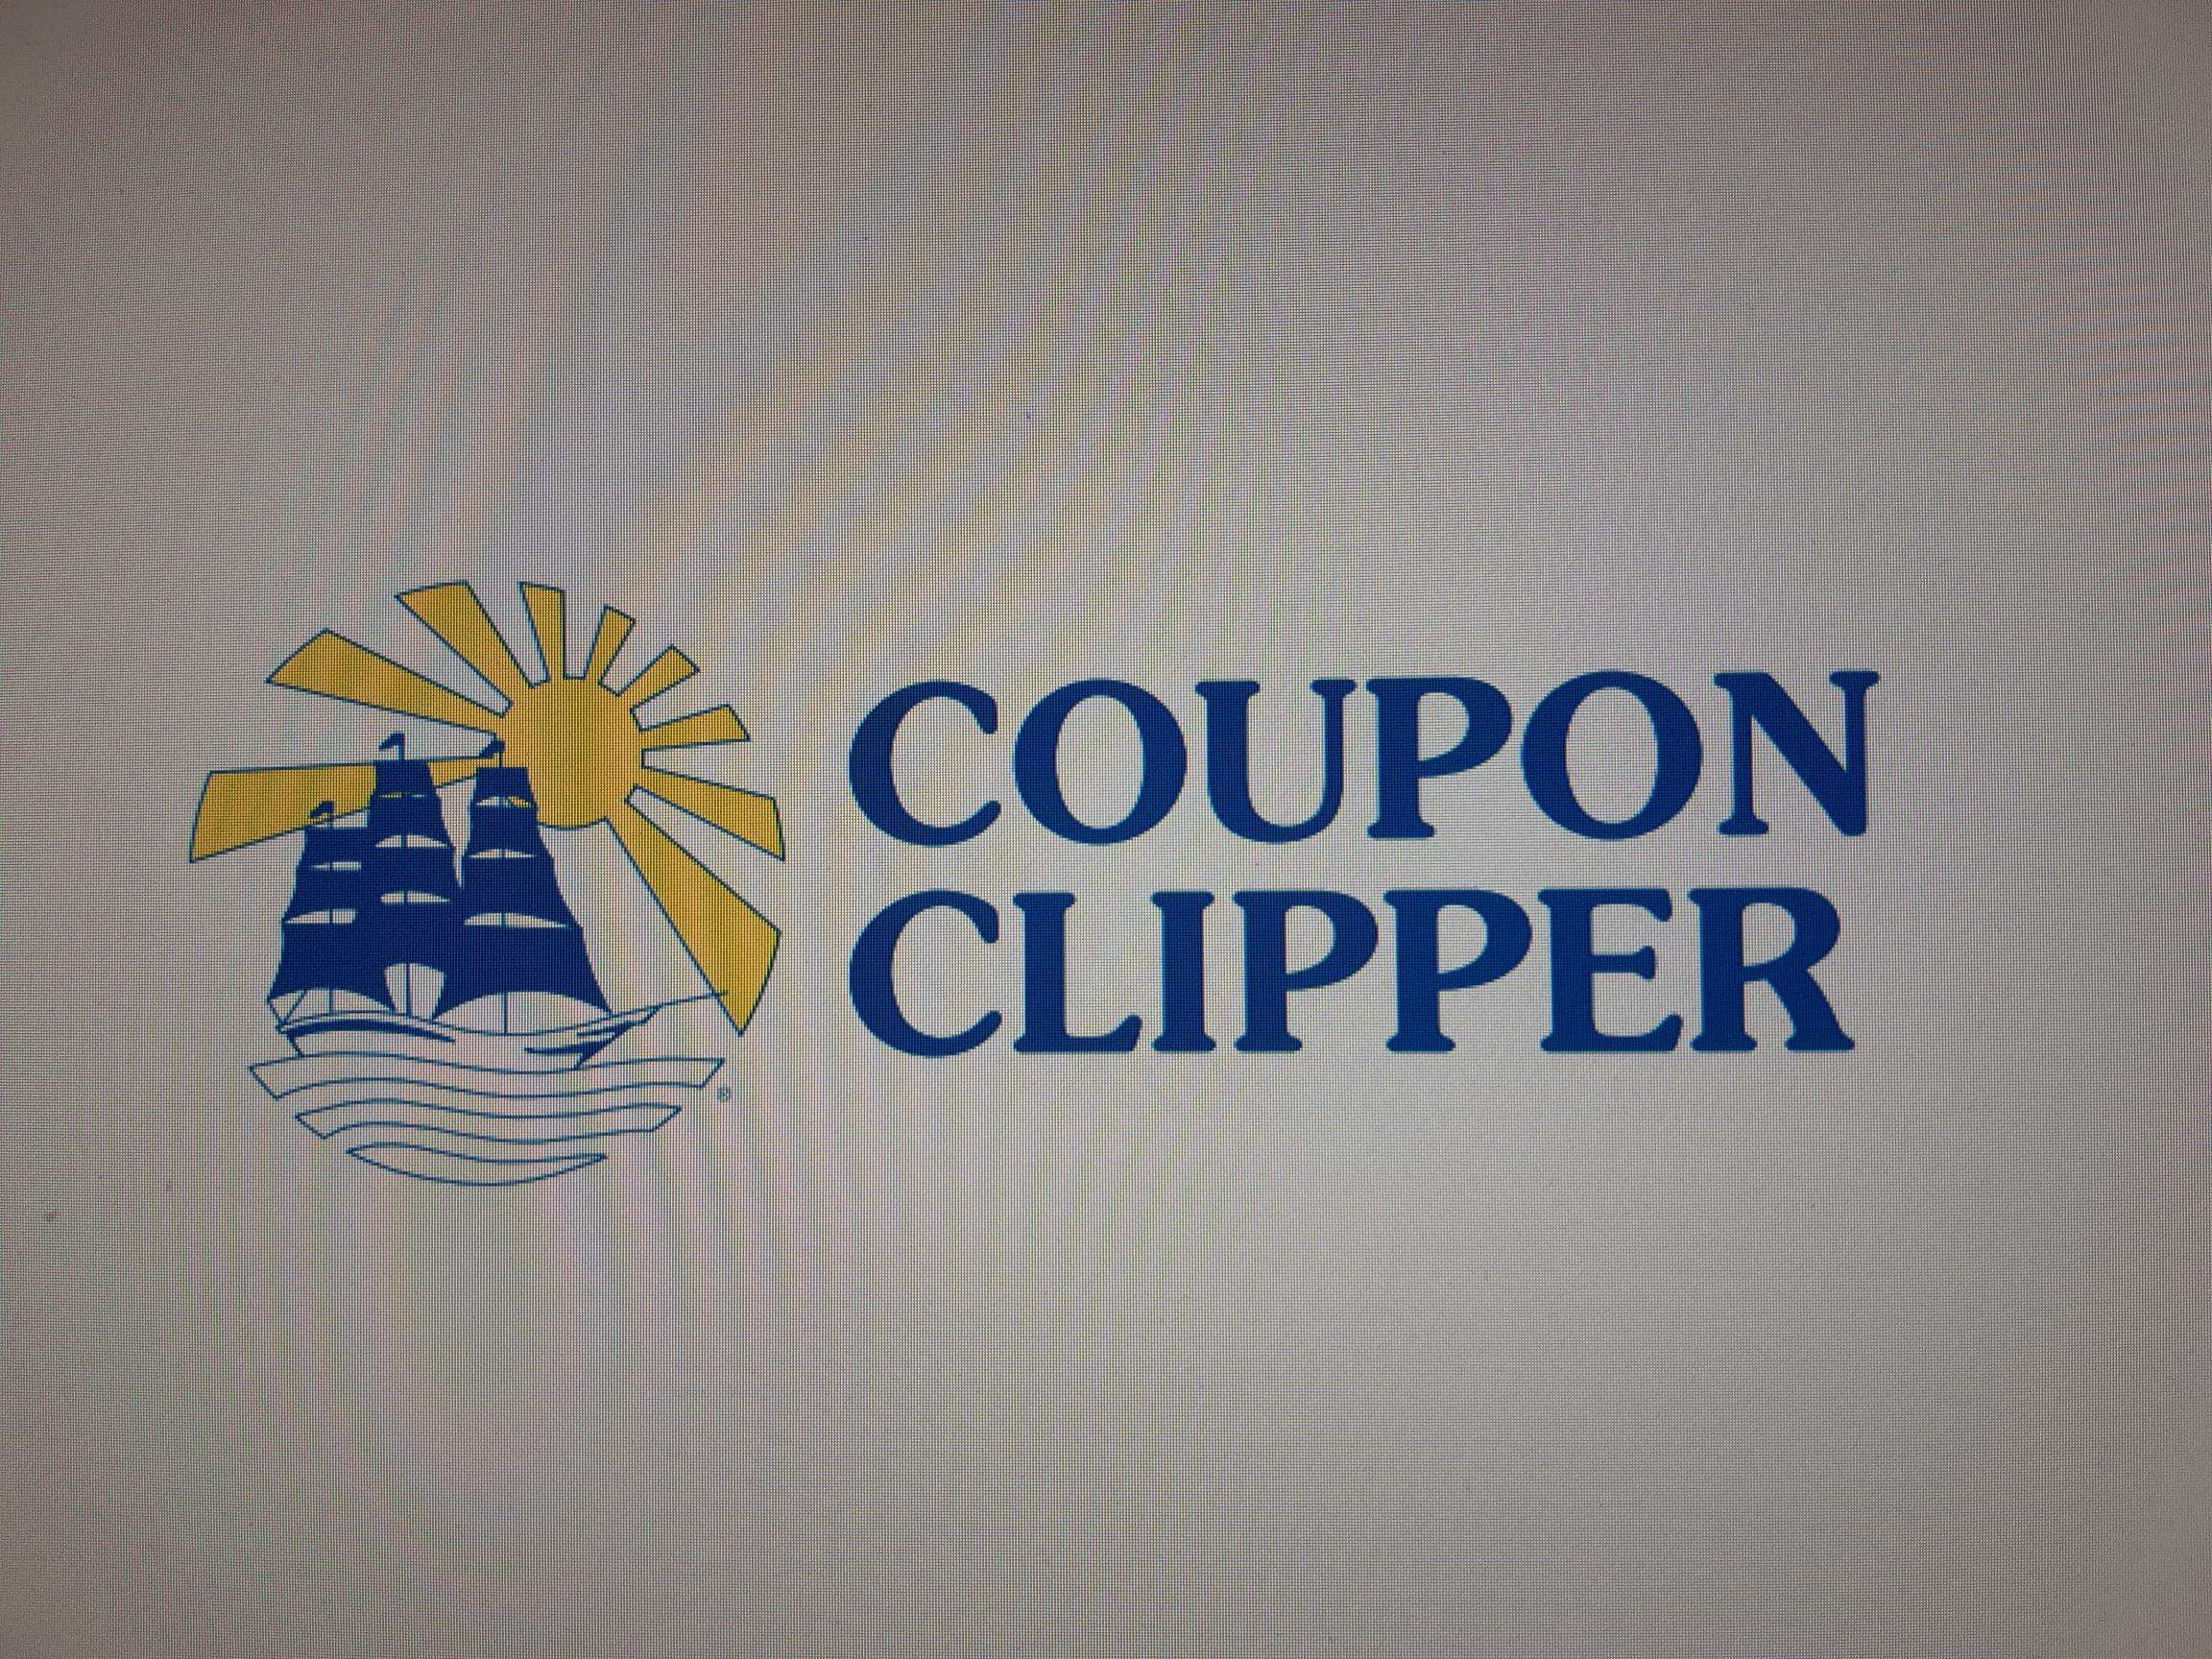 KW Coupon Clipper